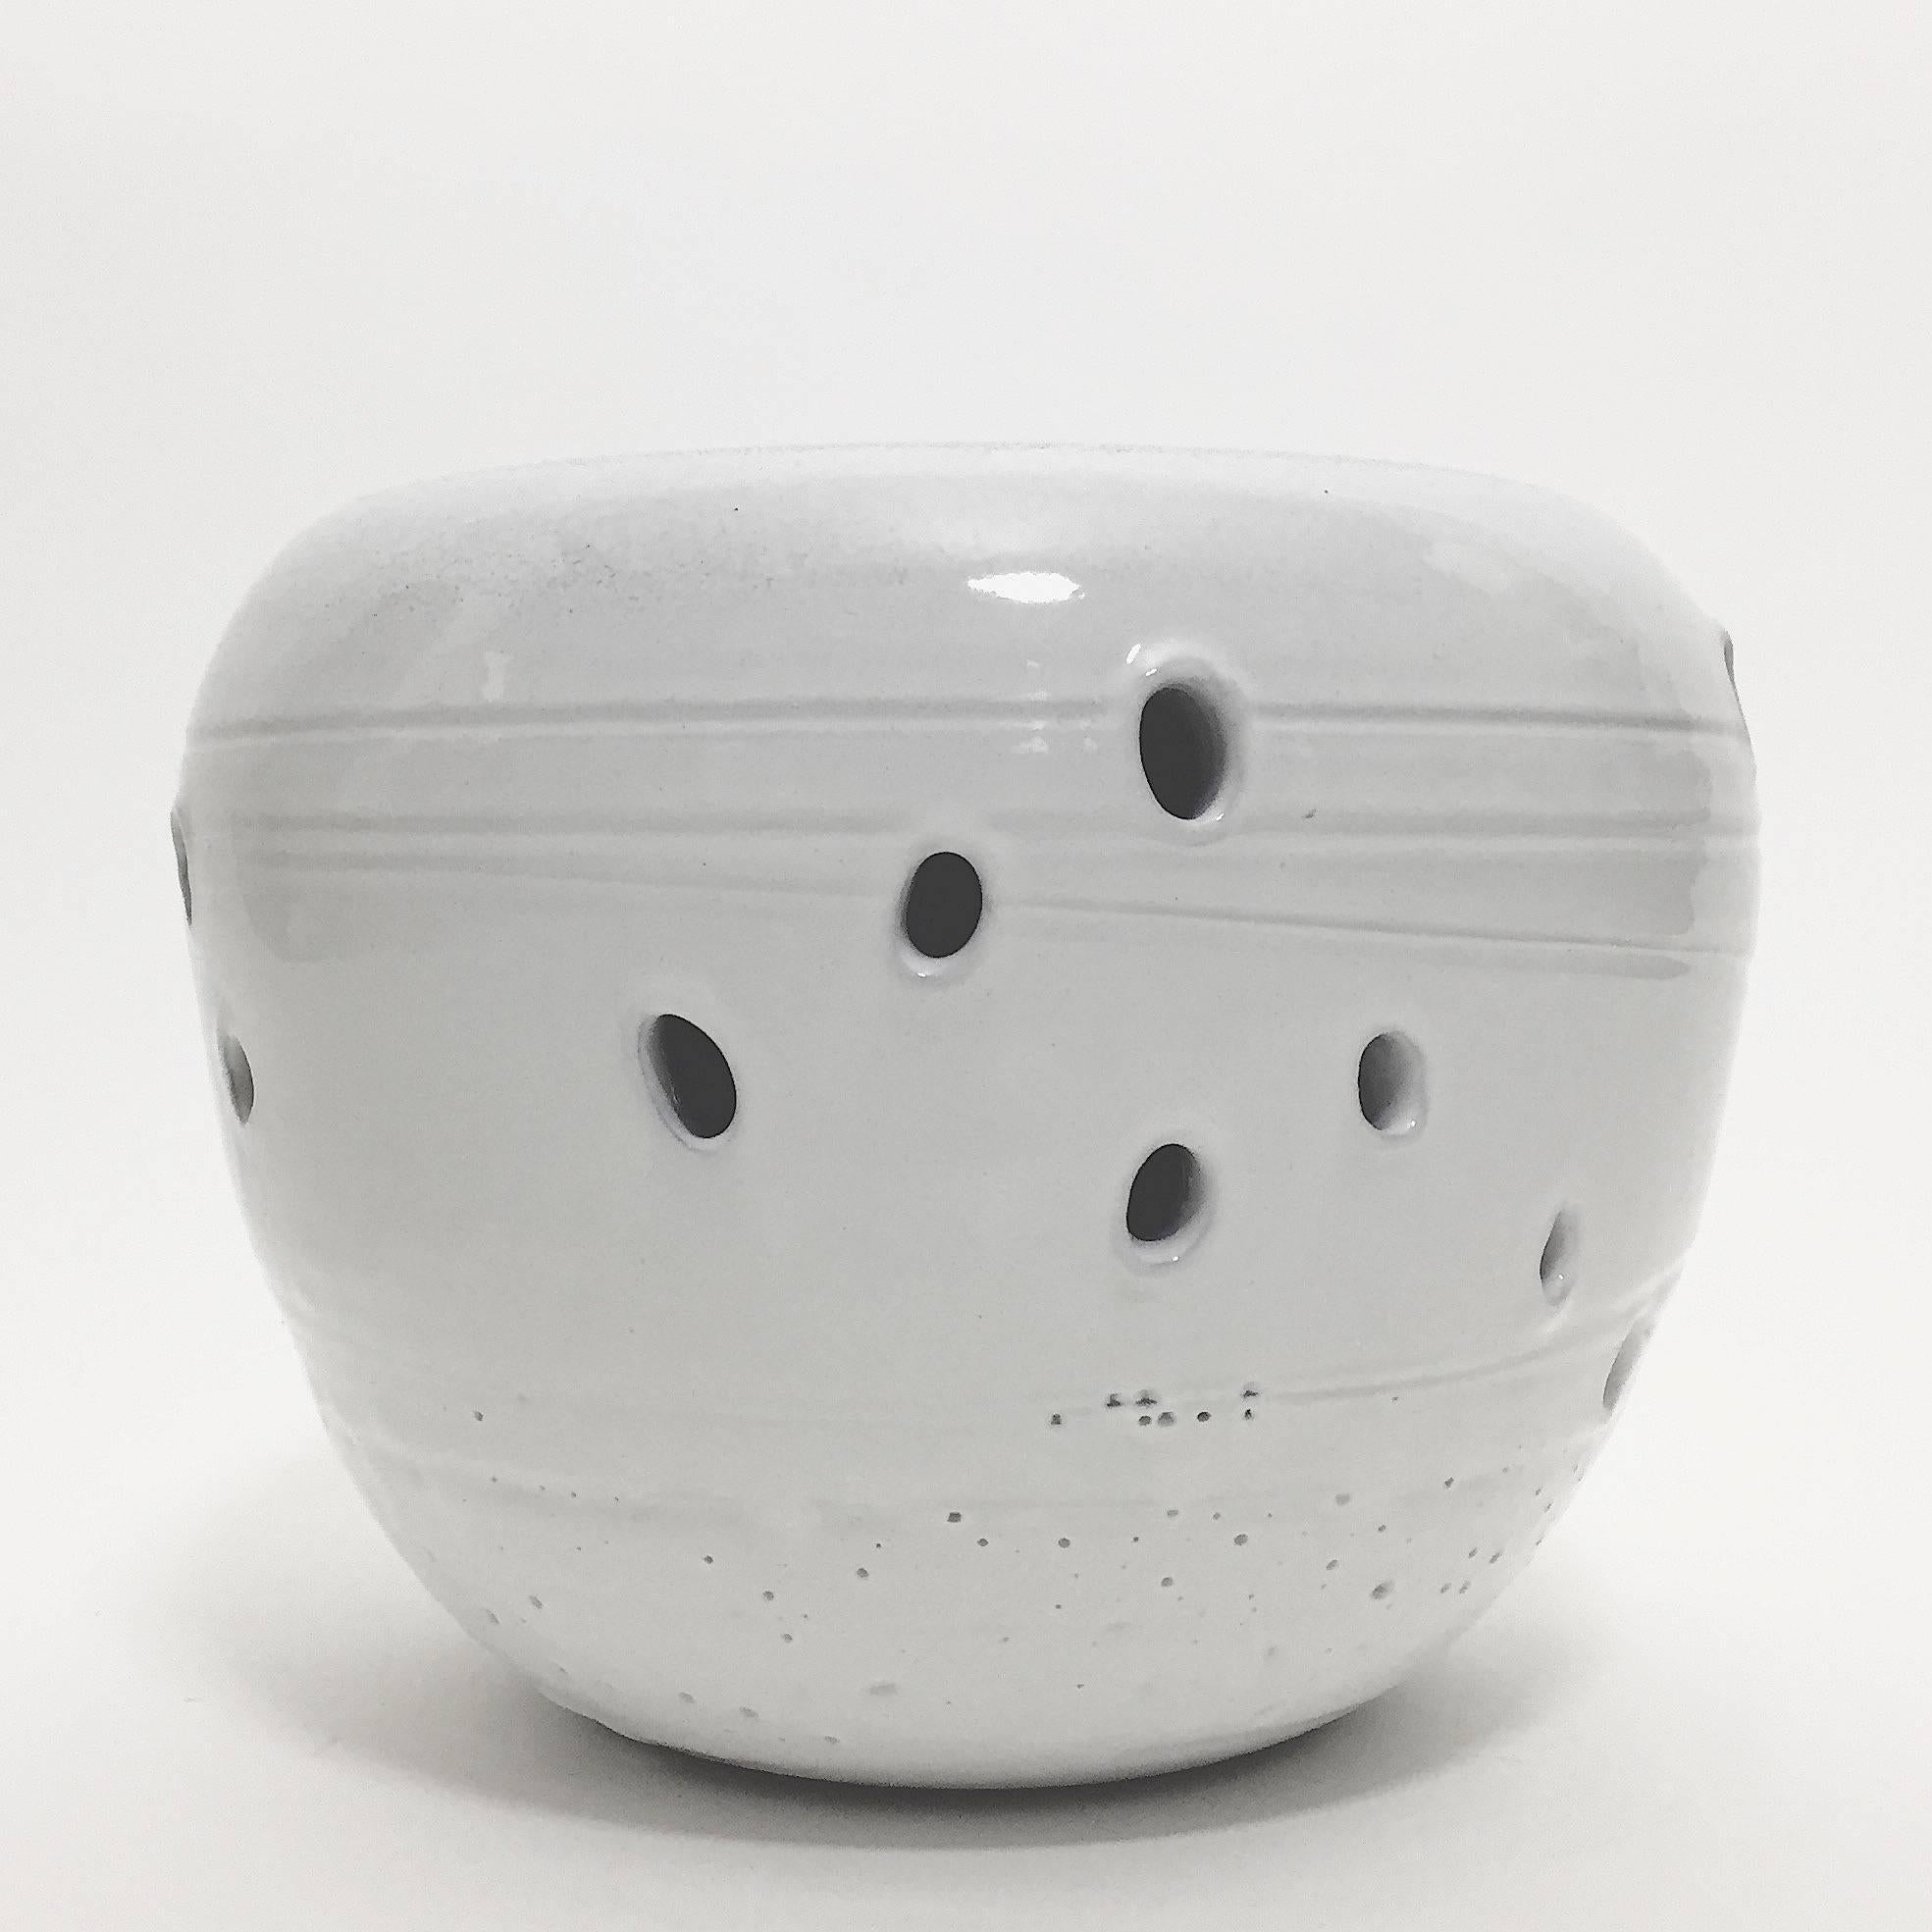 Organic sculpture or decorative bowl.
Ceramic enameled in pure white decorated with perforations and frozen effects glazes. 

One of a kind handmade piece signed by the French ceramicist, Salvatore Parisi.

A second model (images 5 and 6),